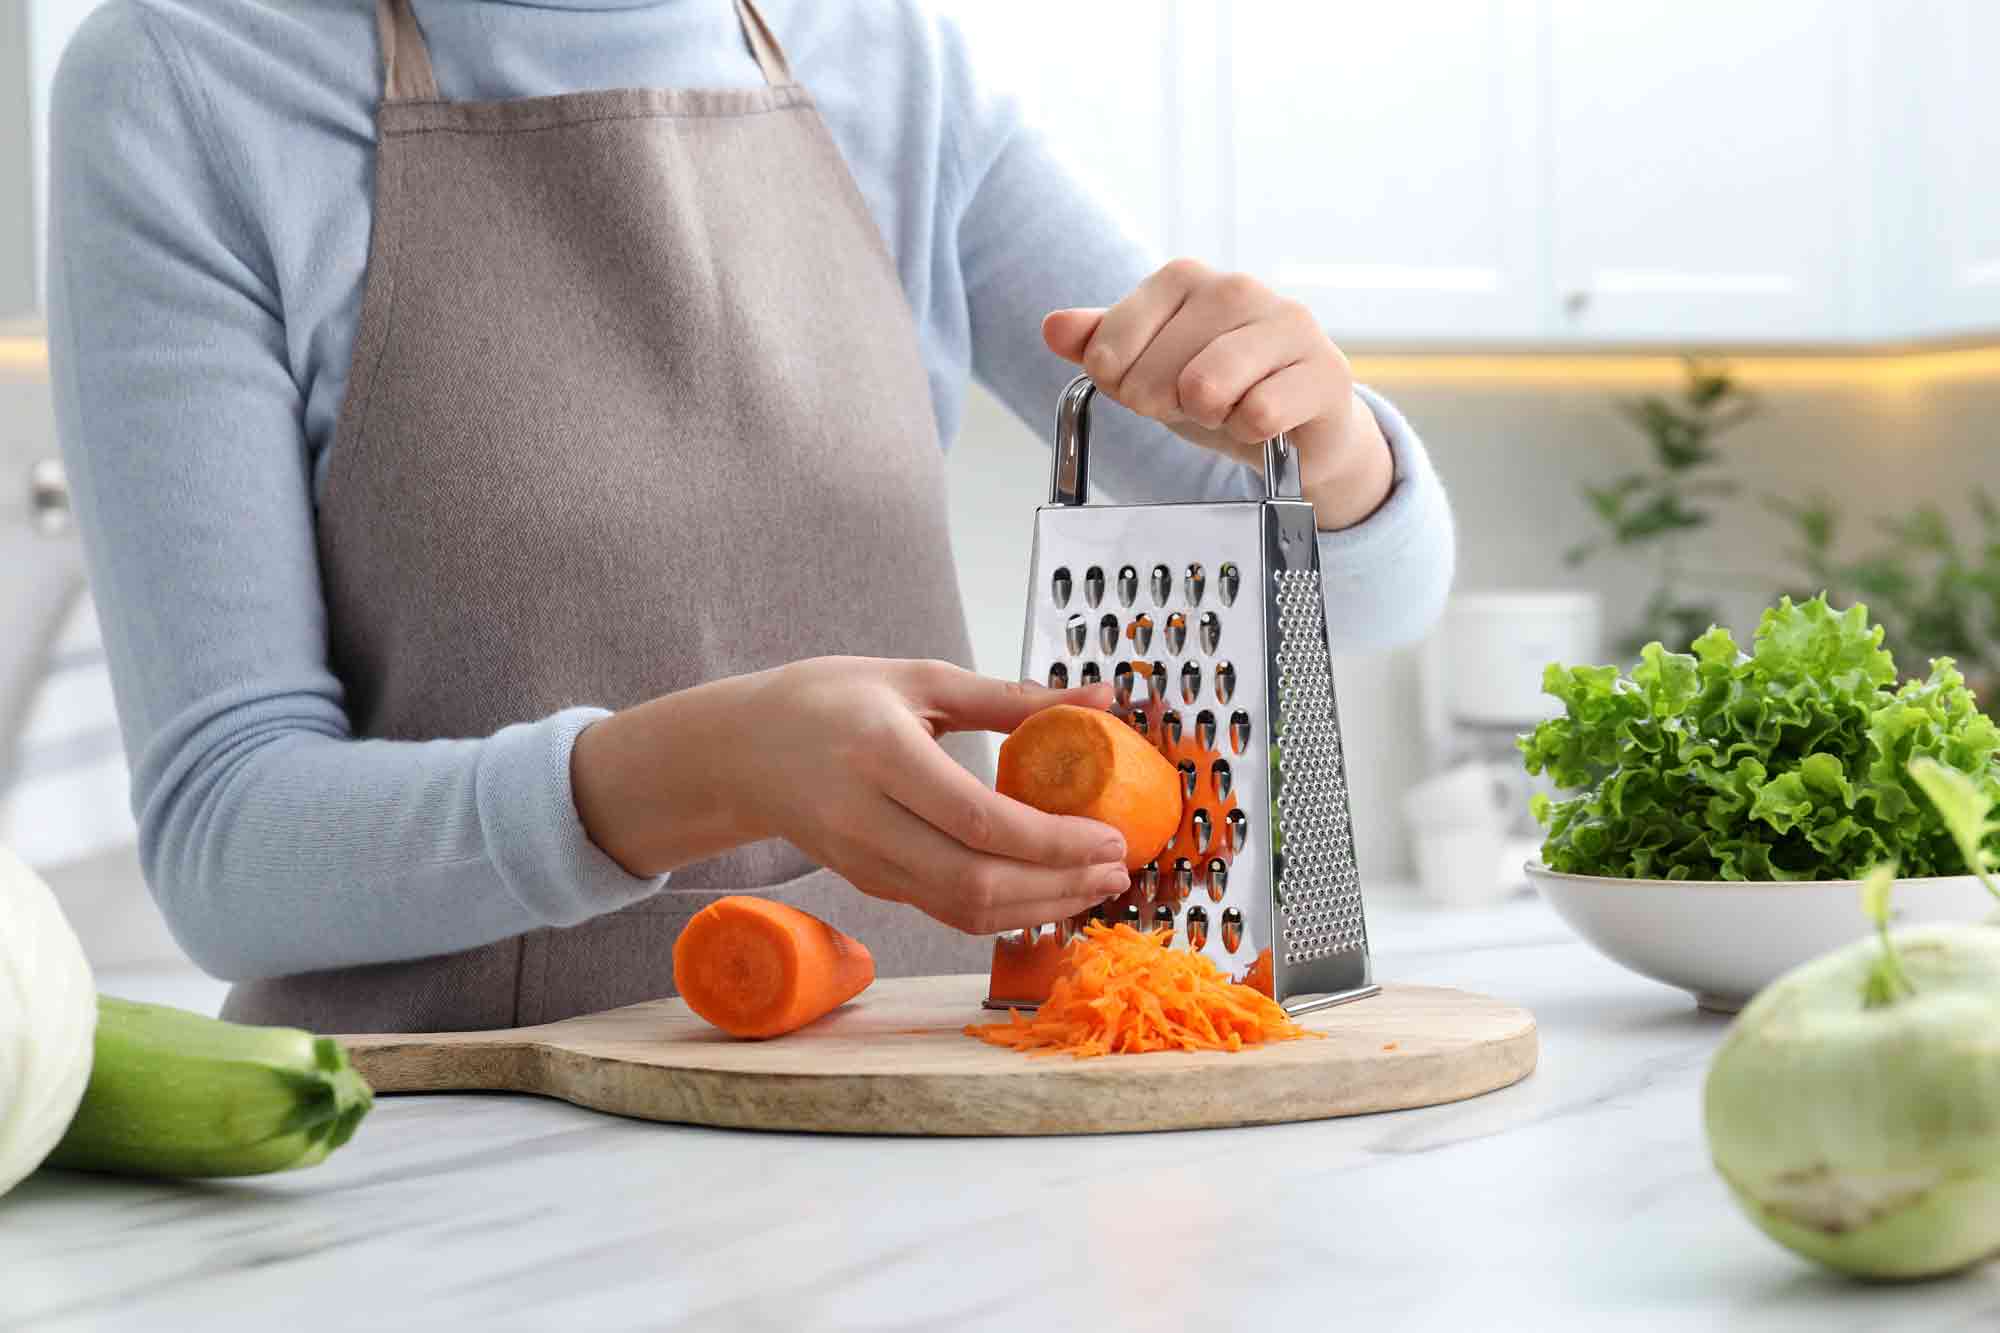 Grate with Confidence: Safety Tips Using Grandma Ann's Electric Grater